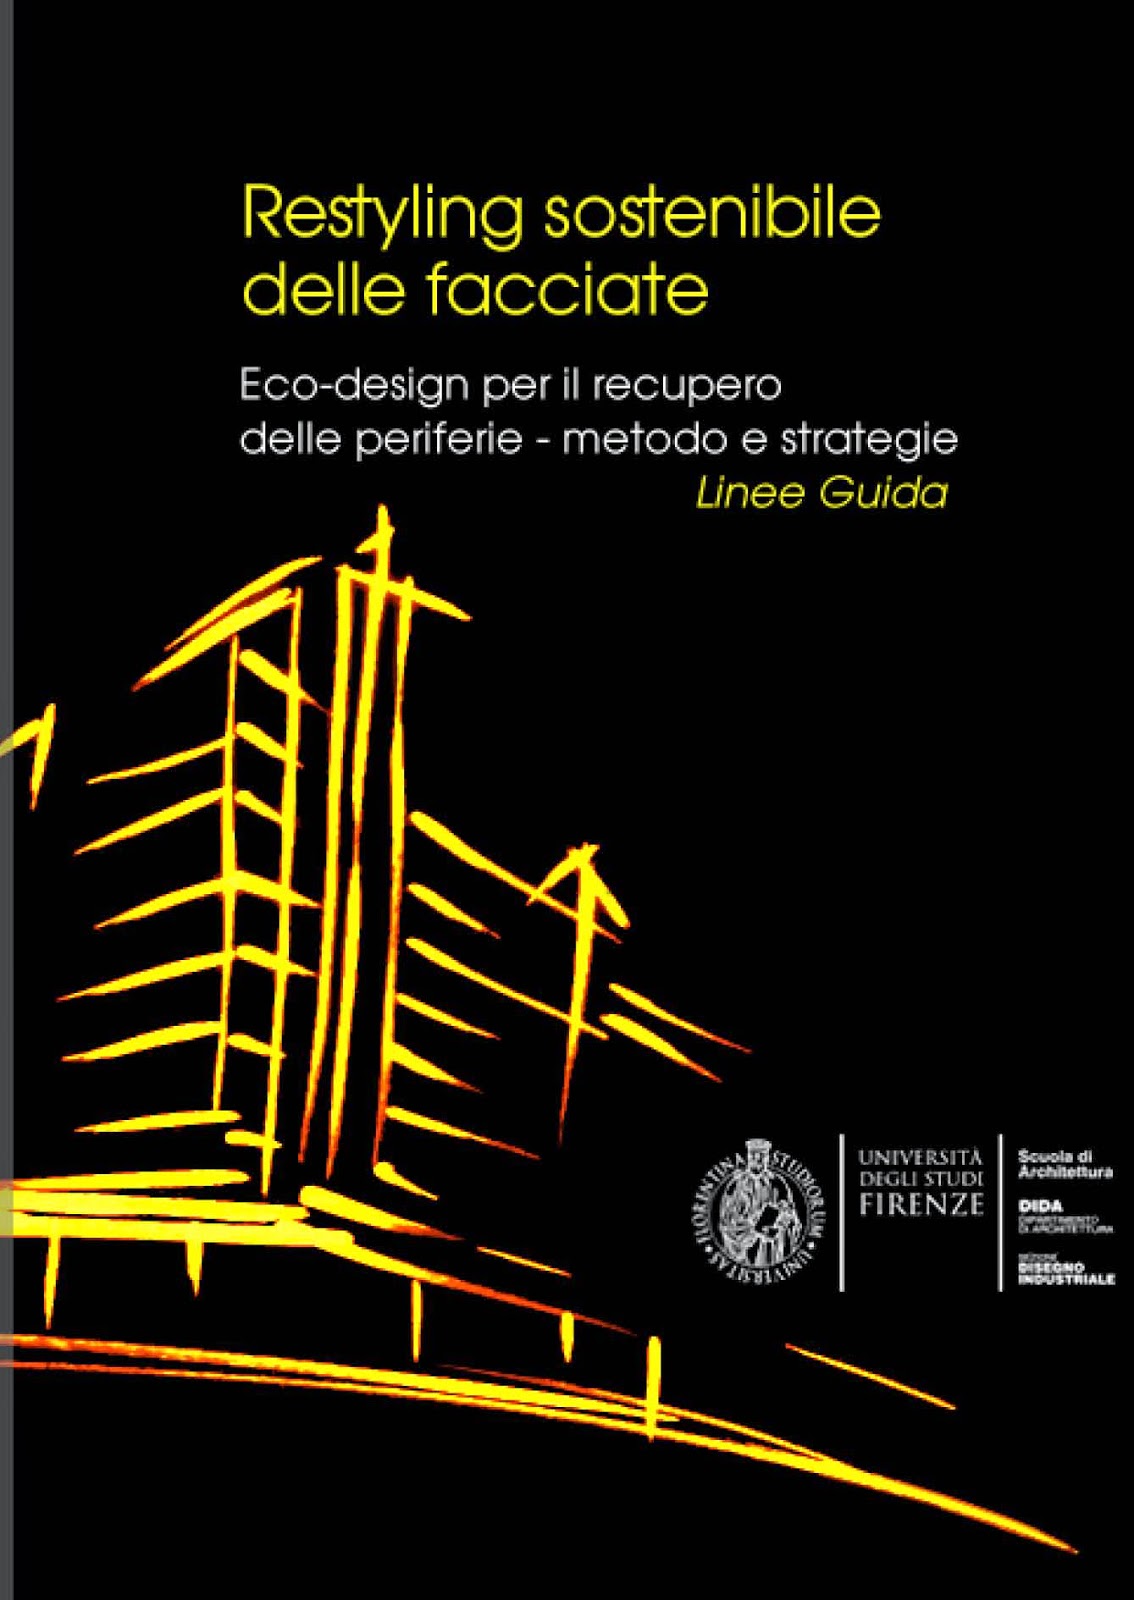 FACADE SUSTAINABLE RESTYLING